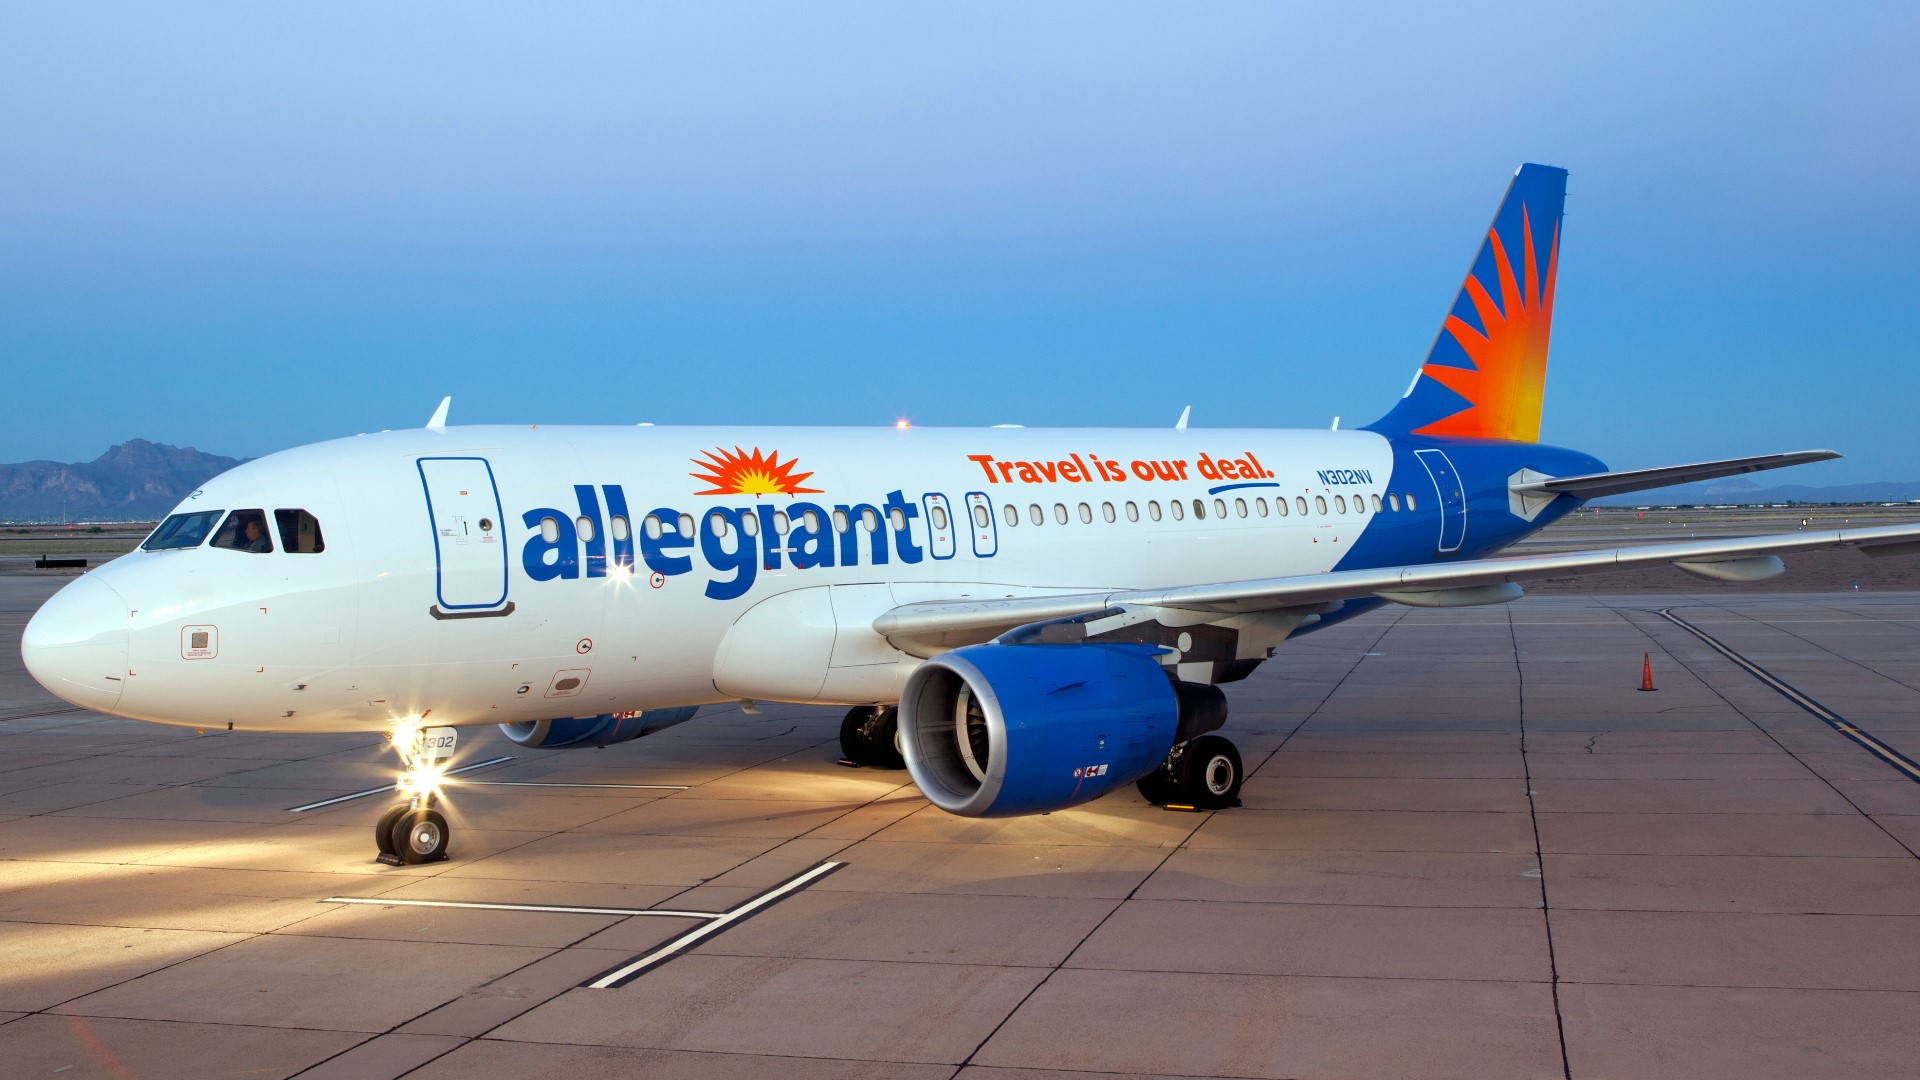 Allegiant Air announced plans to add nonstop flights to California, Massachusetts and South Dakota.